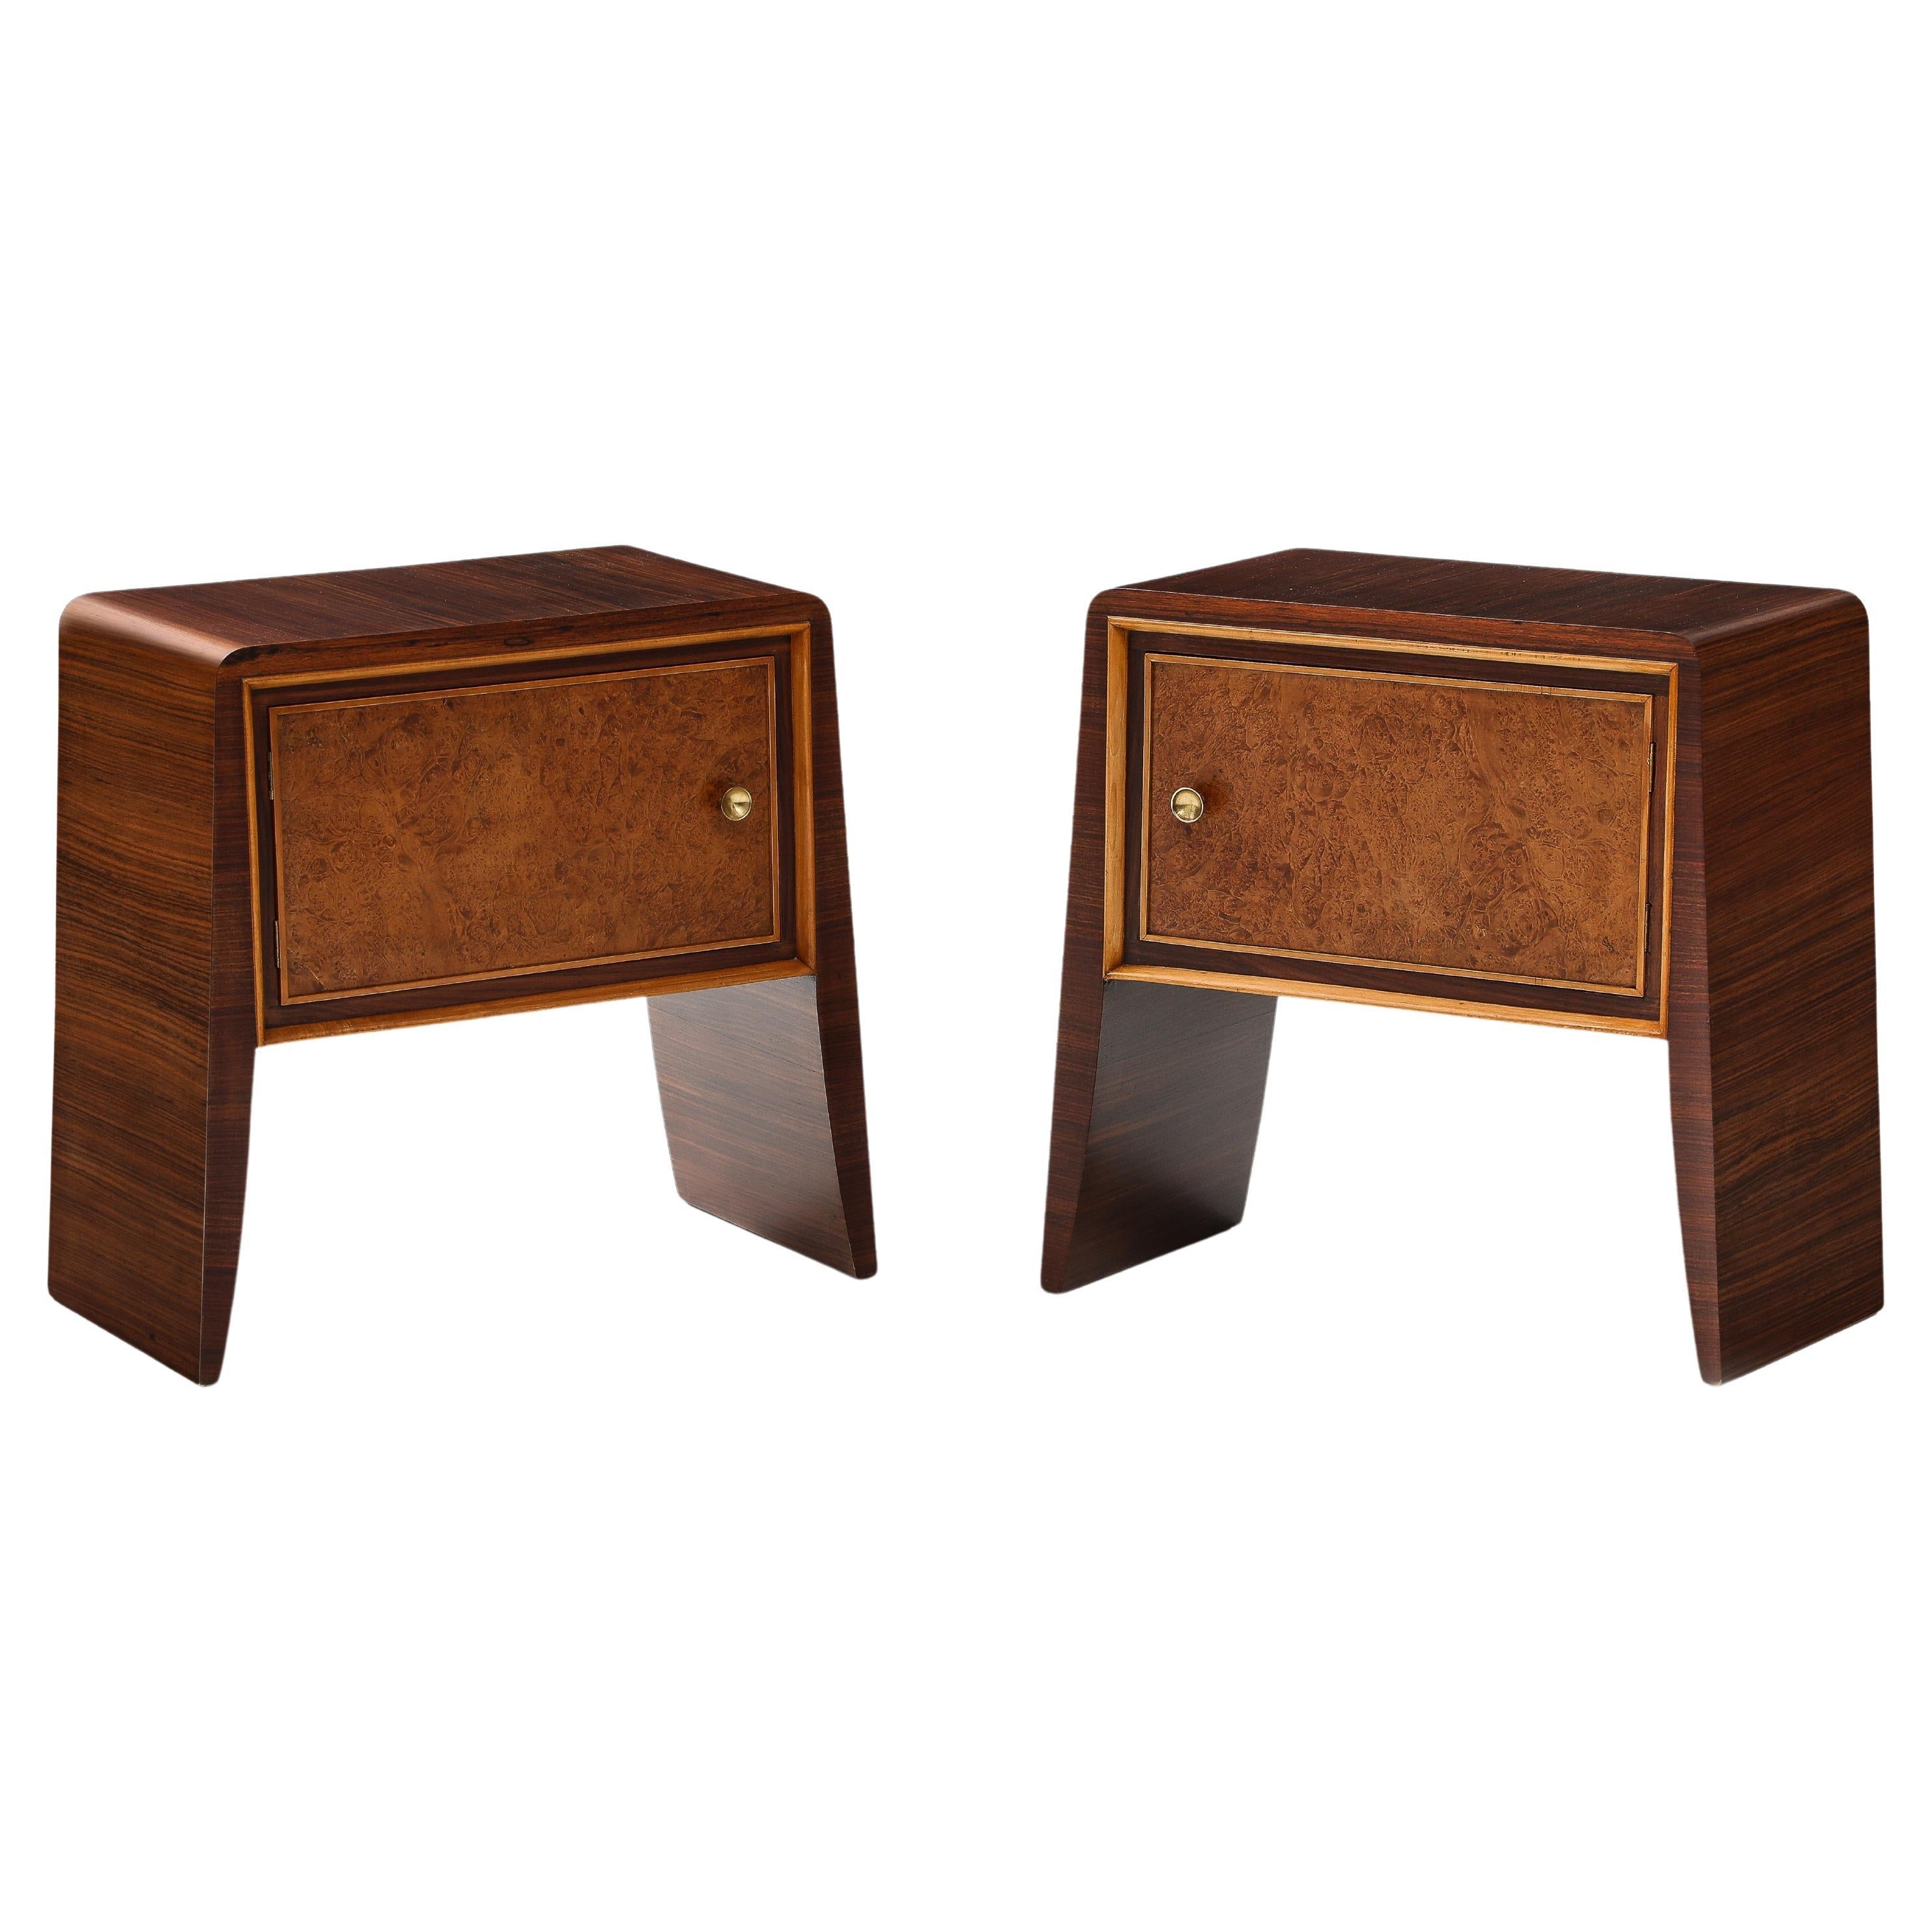 1950s Pair of Rosewood and Birchwood Nightstands or Bedside Tables